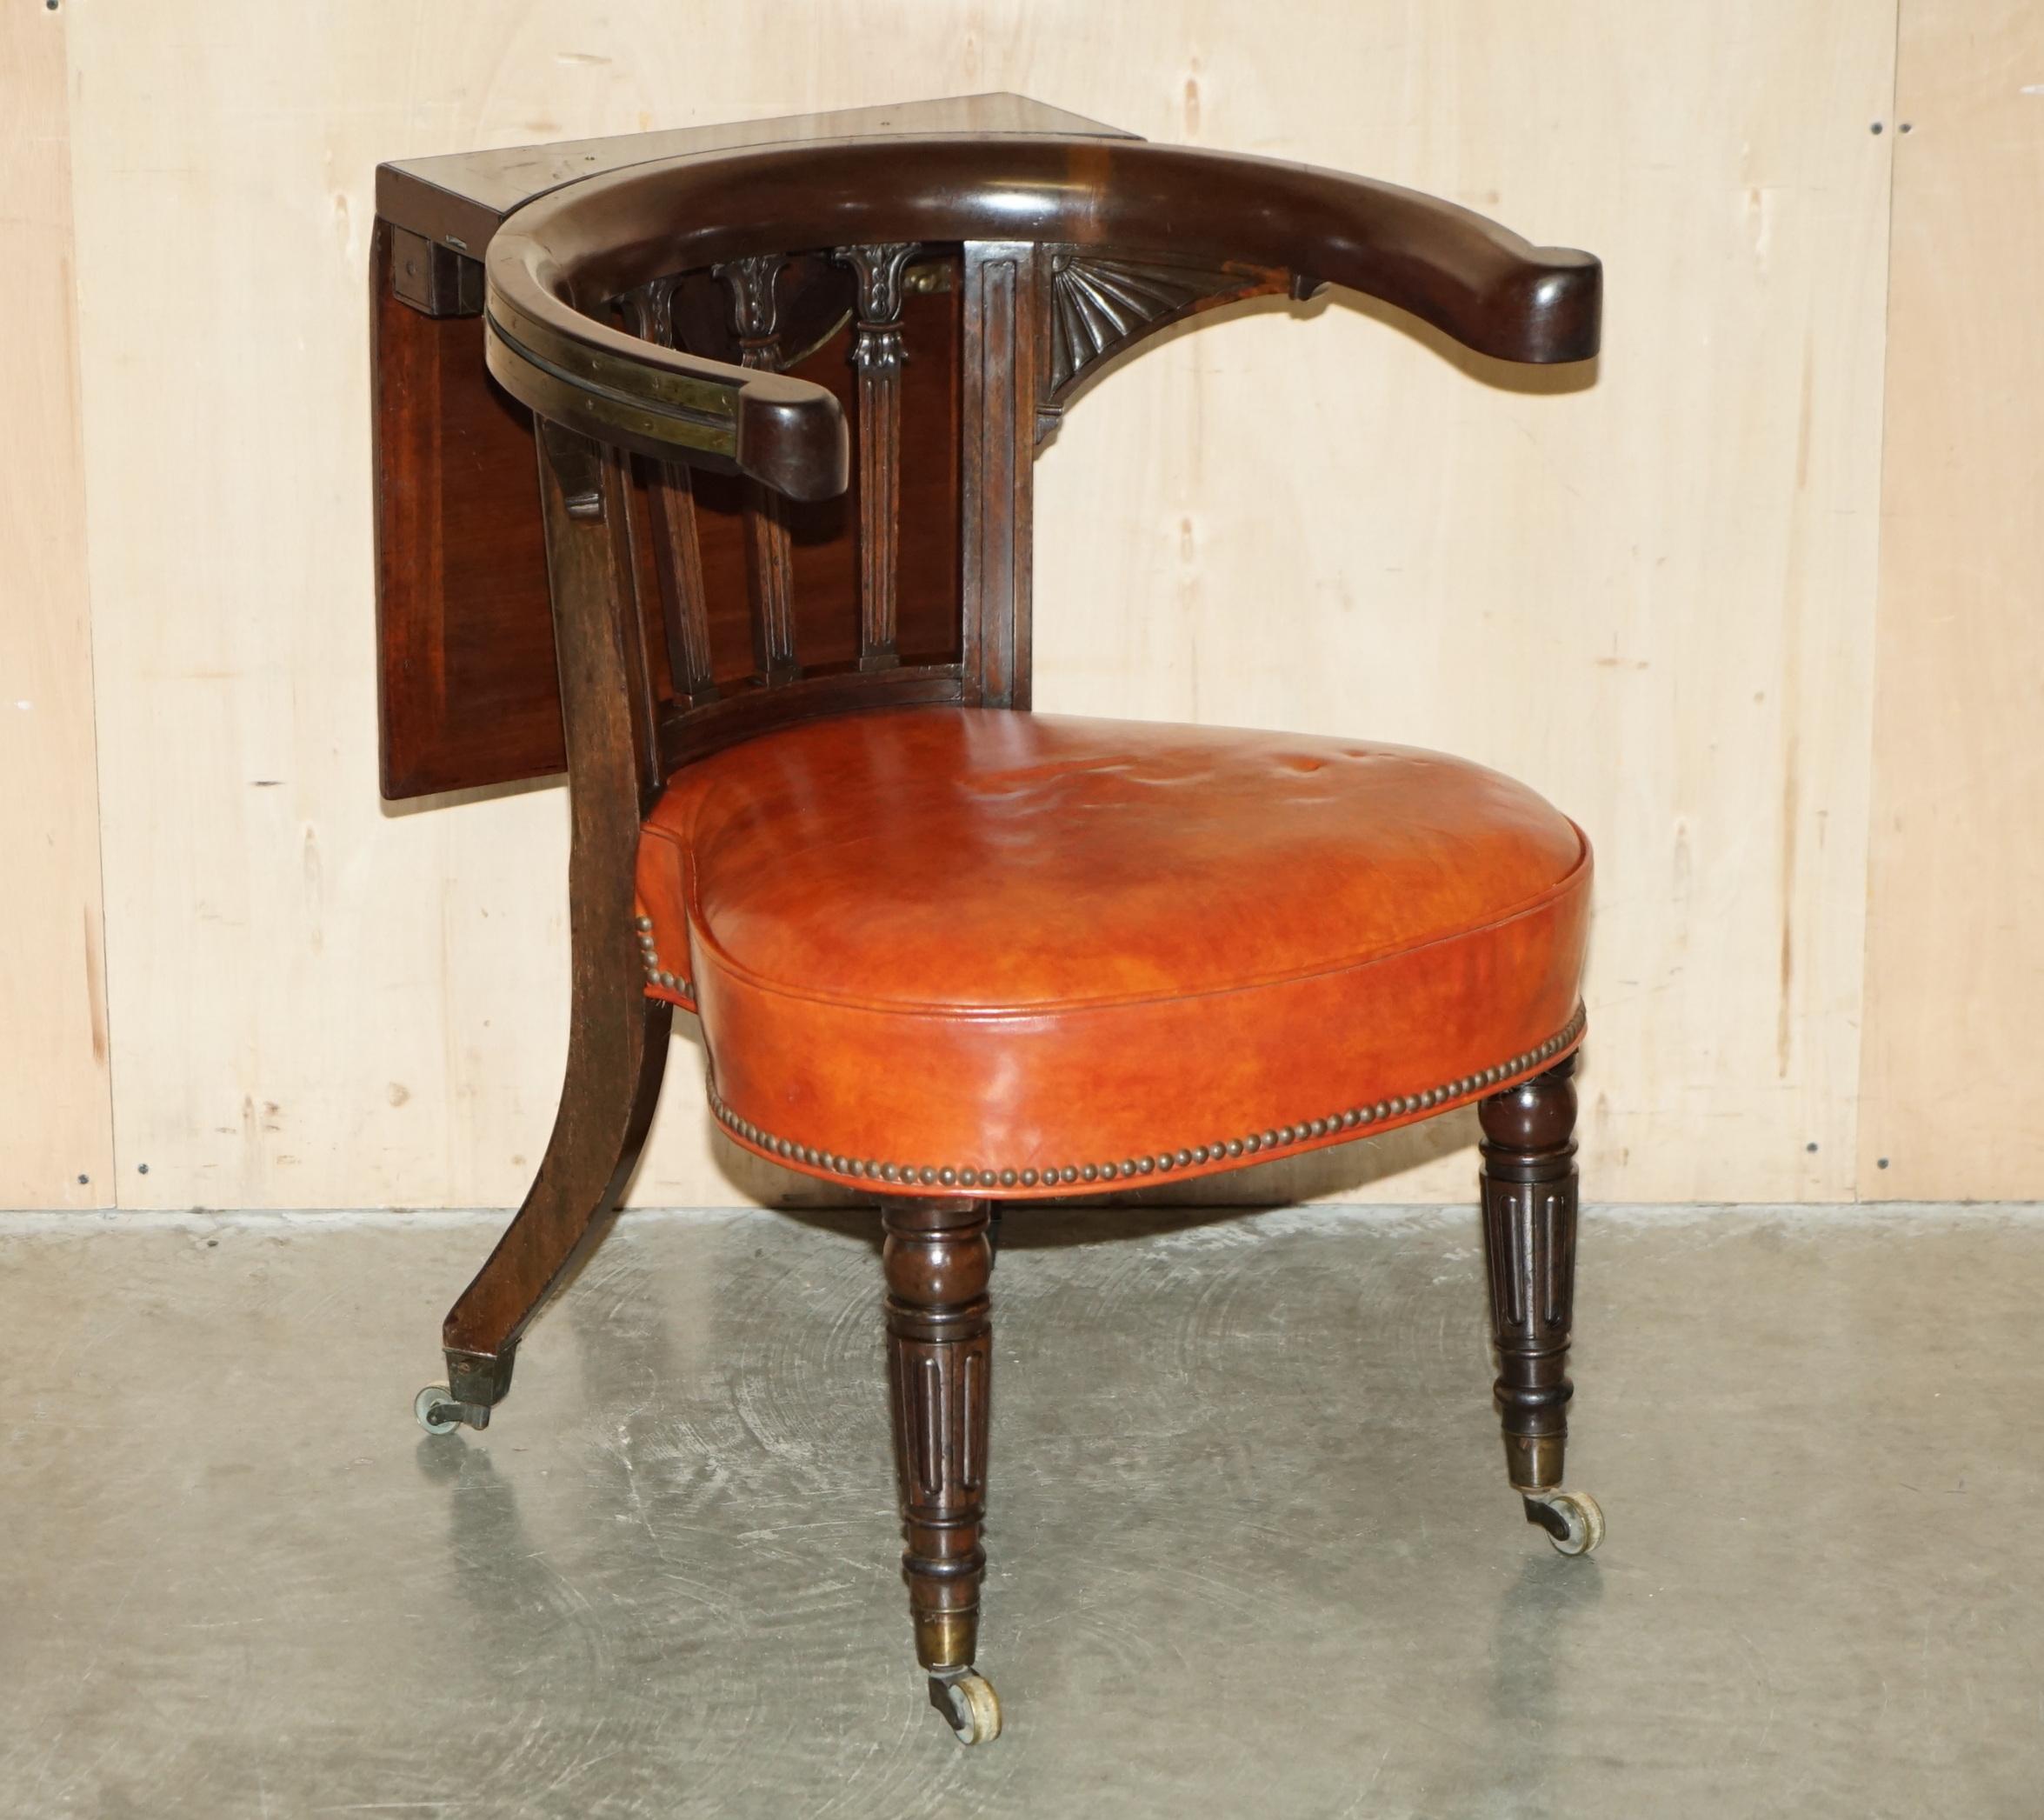 Royal House Antiques

Royal House Antiques is delighted to offer for sale this important handmade made in England circa 1820 George IV hand carved mahogany & leather Cockfighting armchair with reading slope attributed to Morgan and Saunders

Please